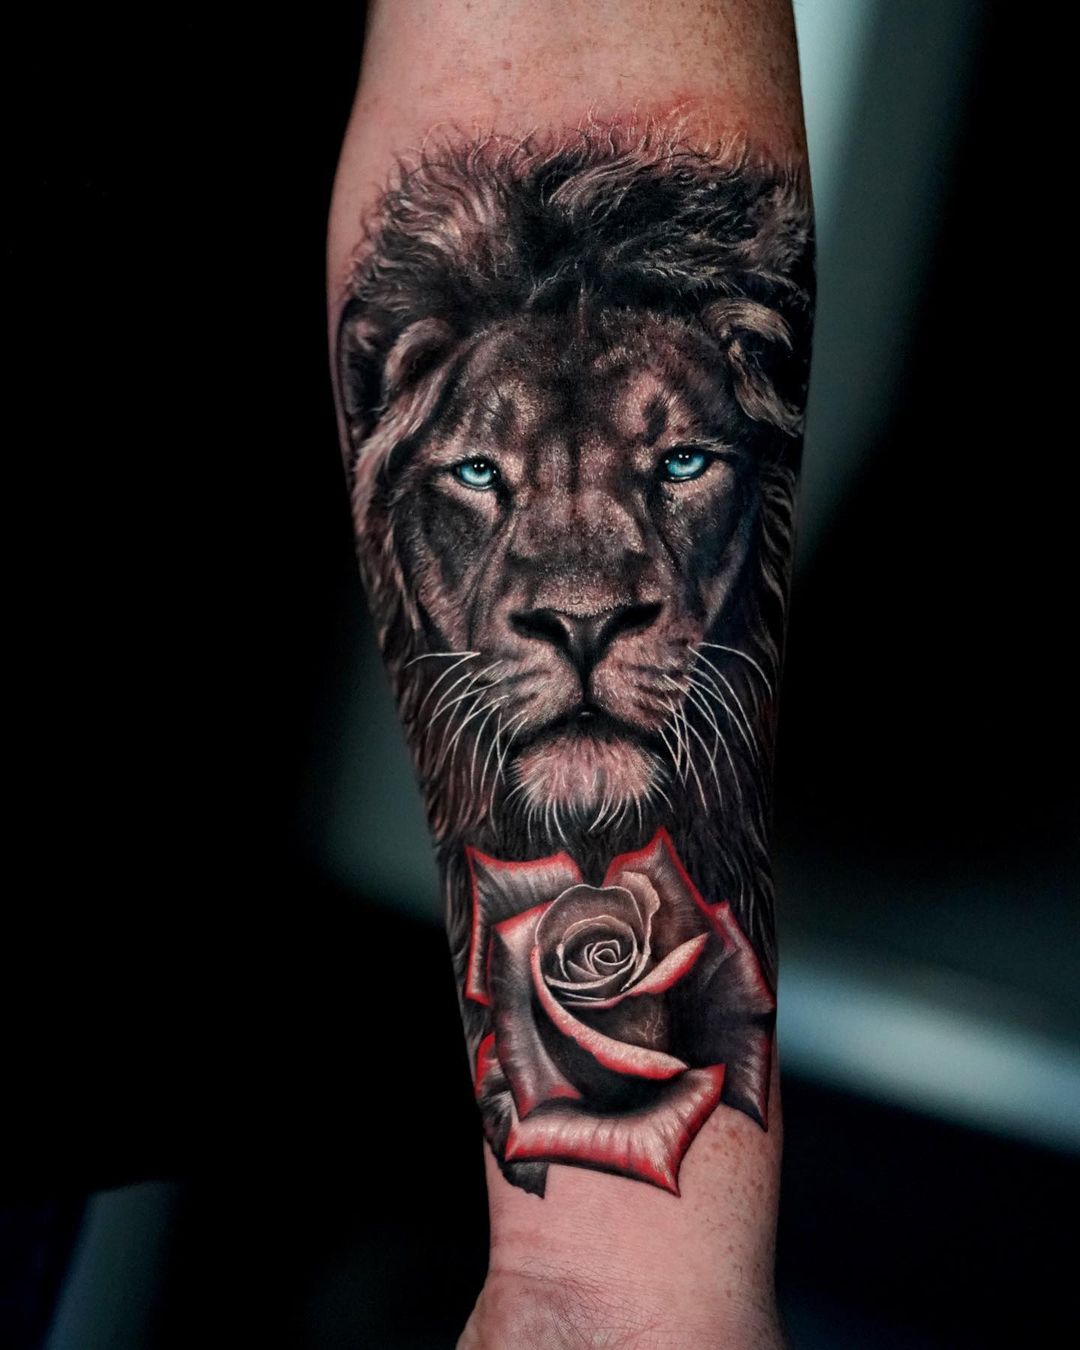 Liontattoo-design-affinity-photo-full-body-shot-by by Giugus46 on DeviantArt